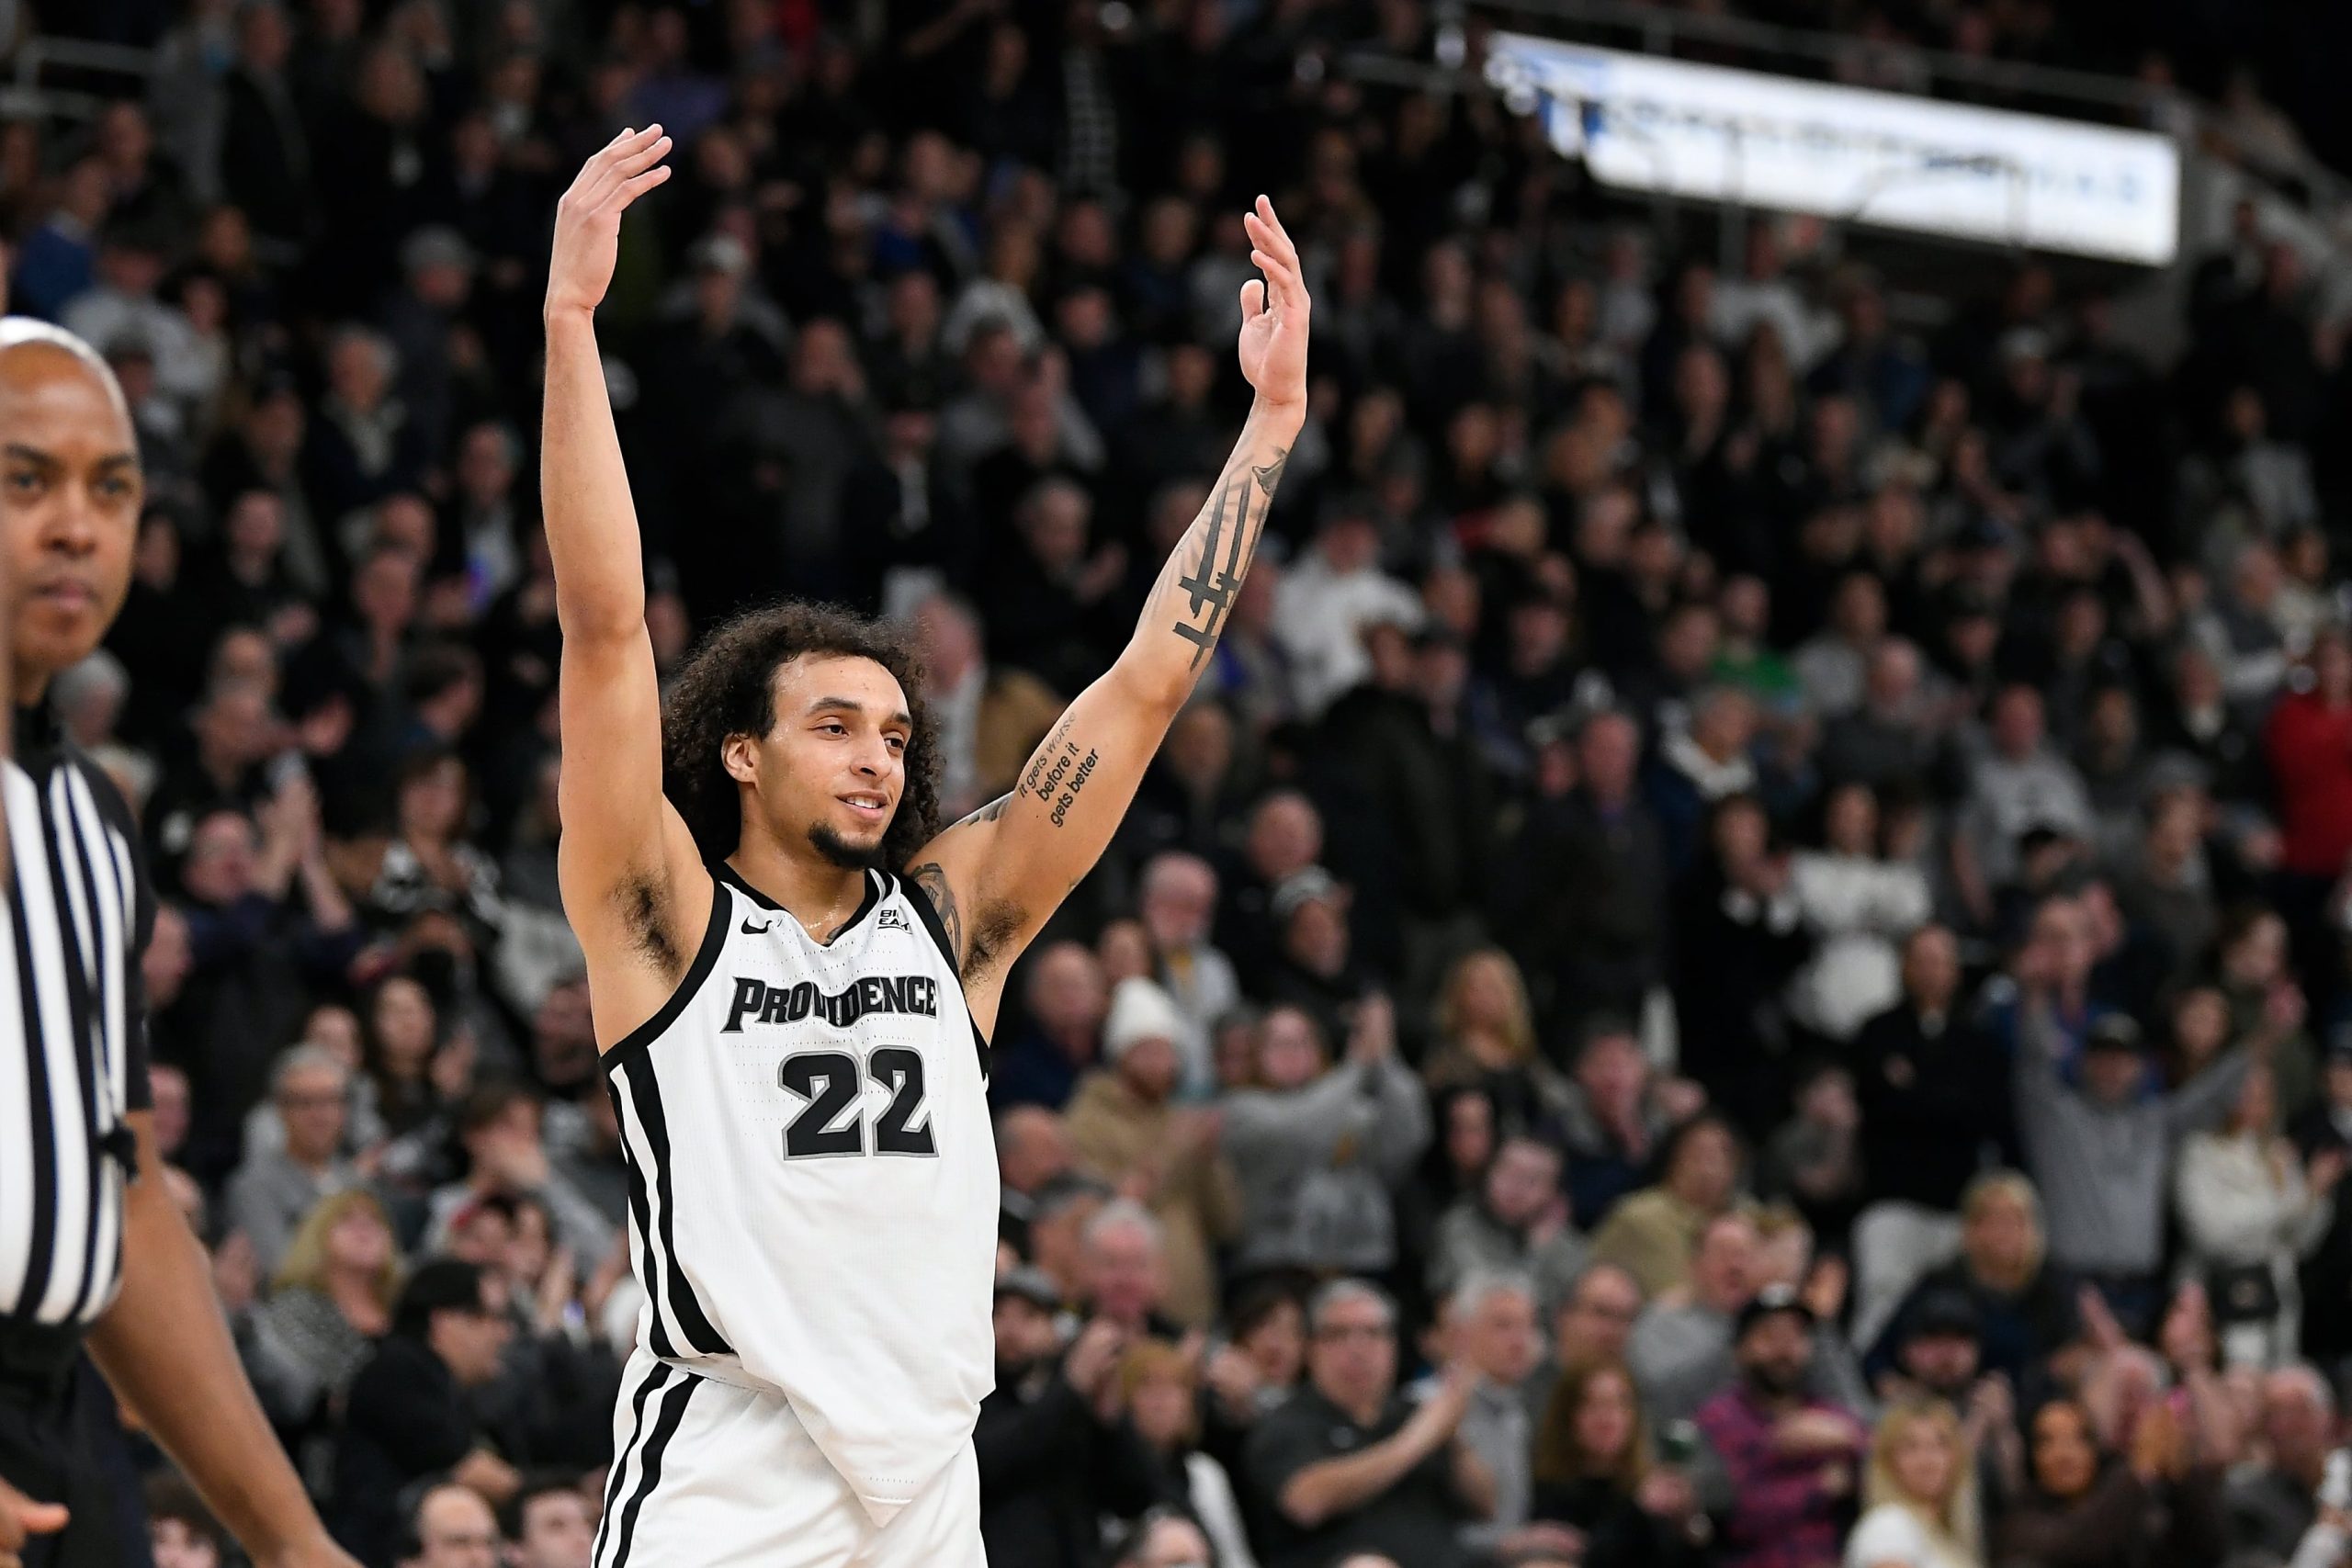 College basketball best bets for Tuesday, 2/22: Providence keeps things close